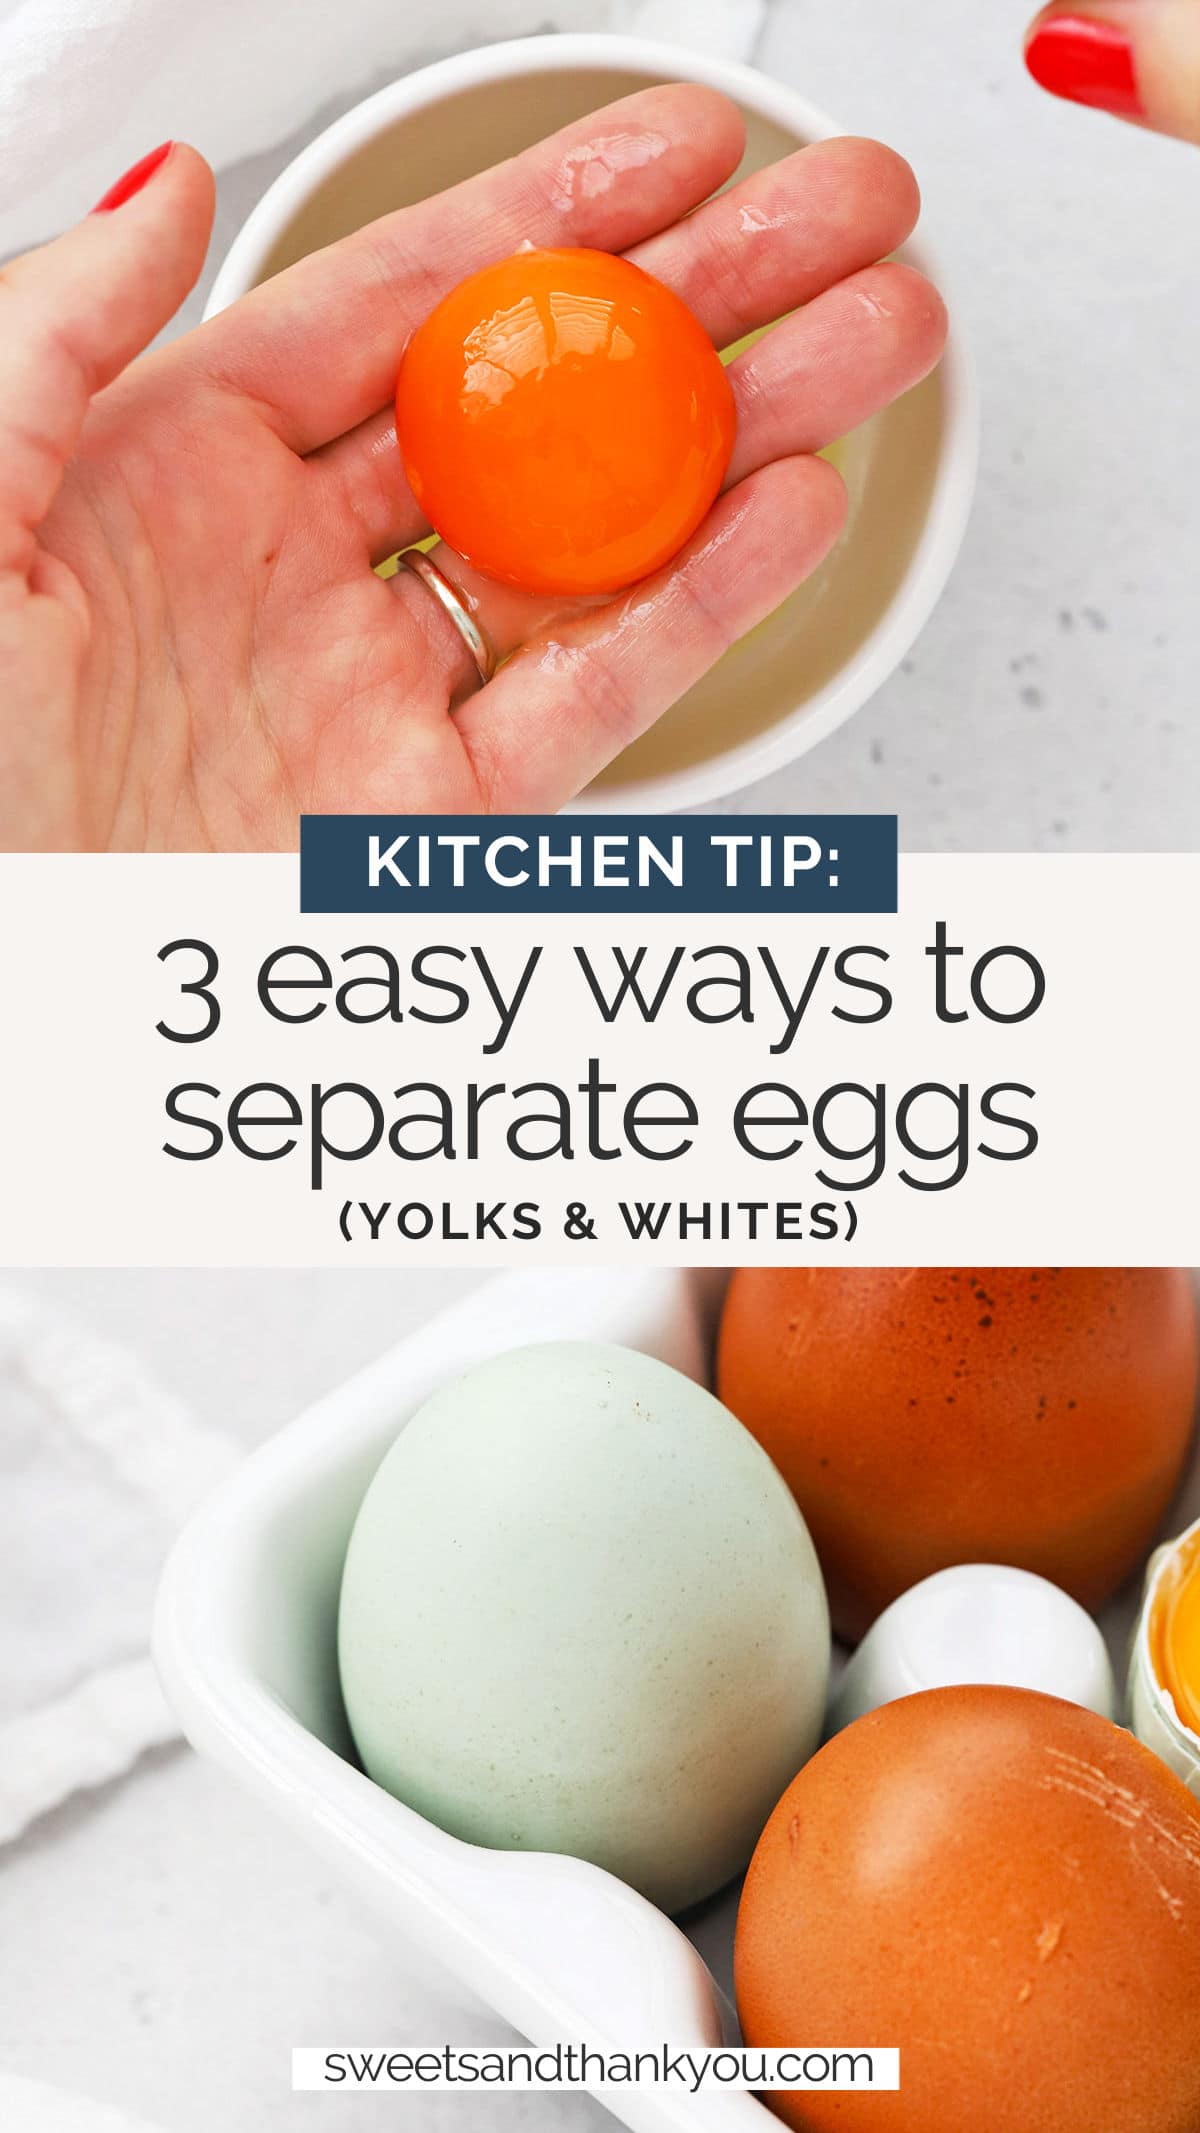 How to Separate Eggs - Learn 3 ways to separate egg whites and yolks for recipes. You’ll be ready to whip up meringues, add texture to cookies, and more! // How to separate eggs // How to separate egg yolks and whites // Baking Tips // Baking Basics // Baking Tutorial // Separating eggs #baking #glutenfreebaking #bakingtip #kitchentip #bakingtutorial #eggs #eggyolks #eggwhites